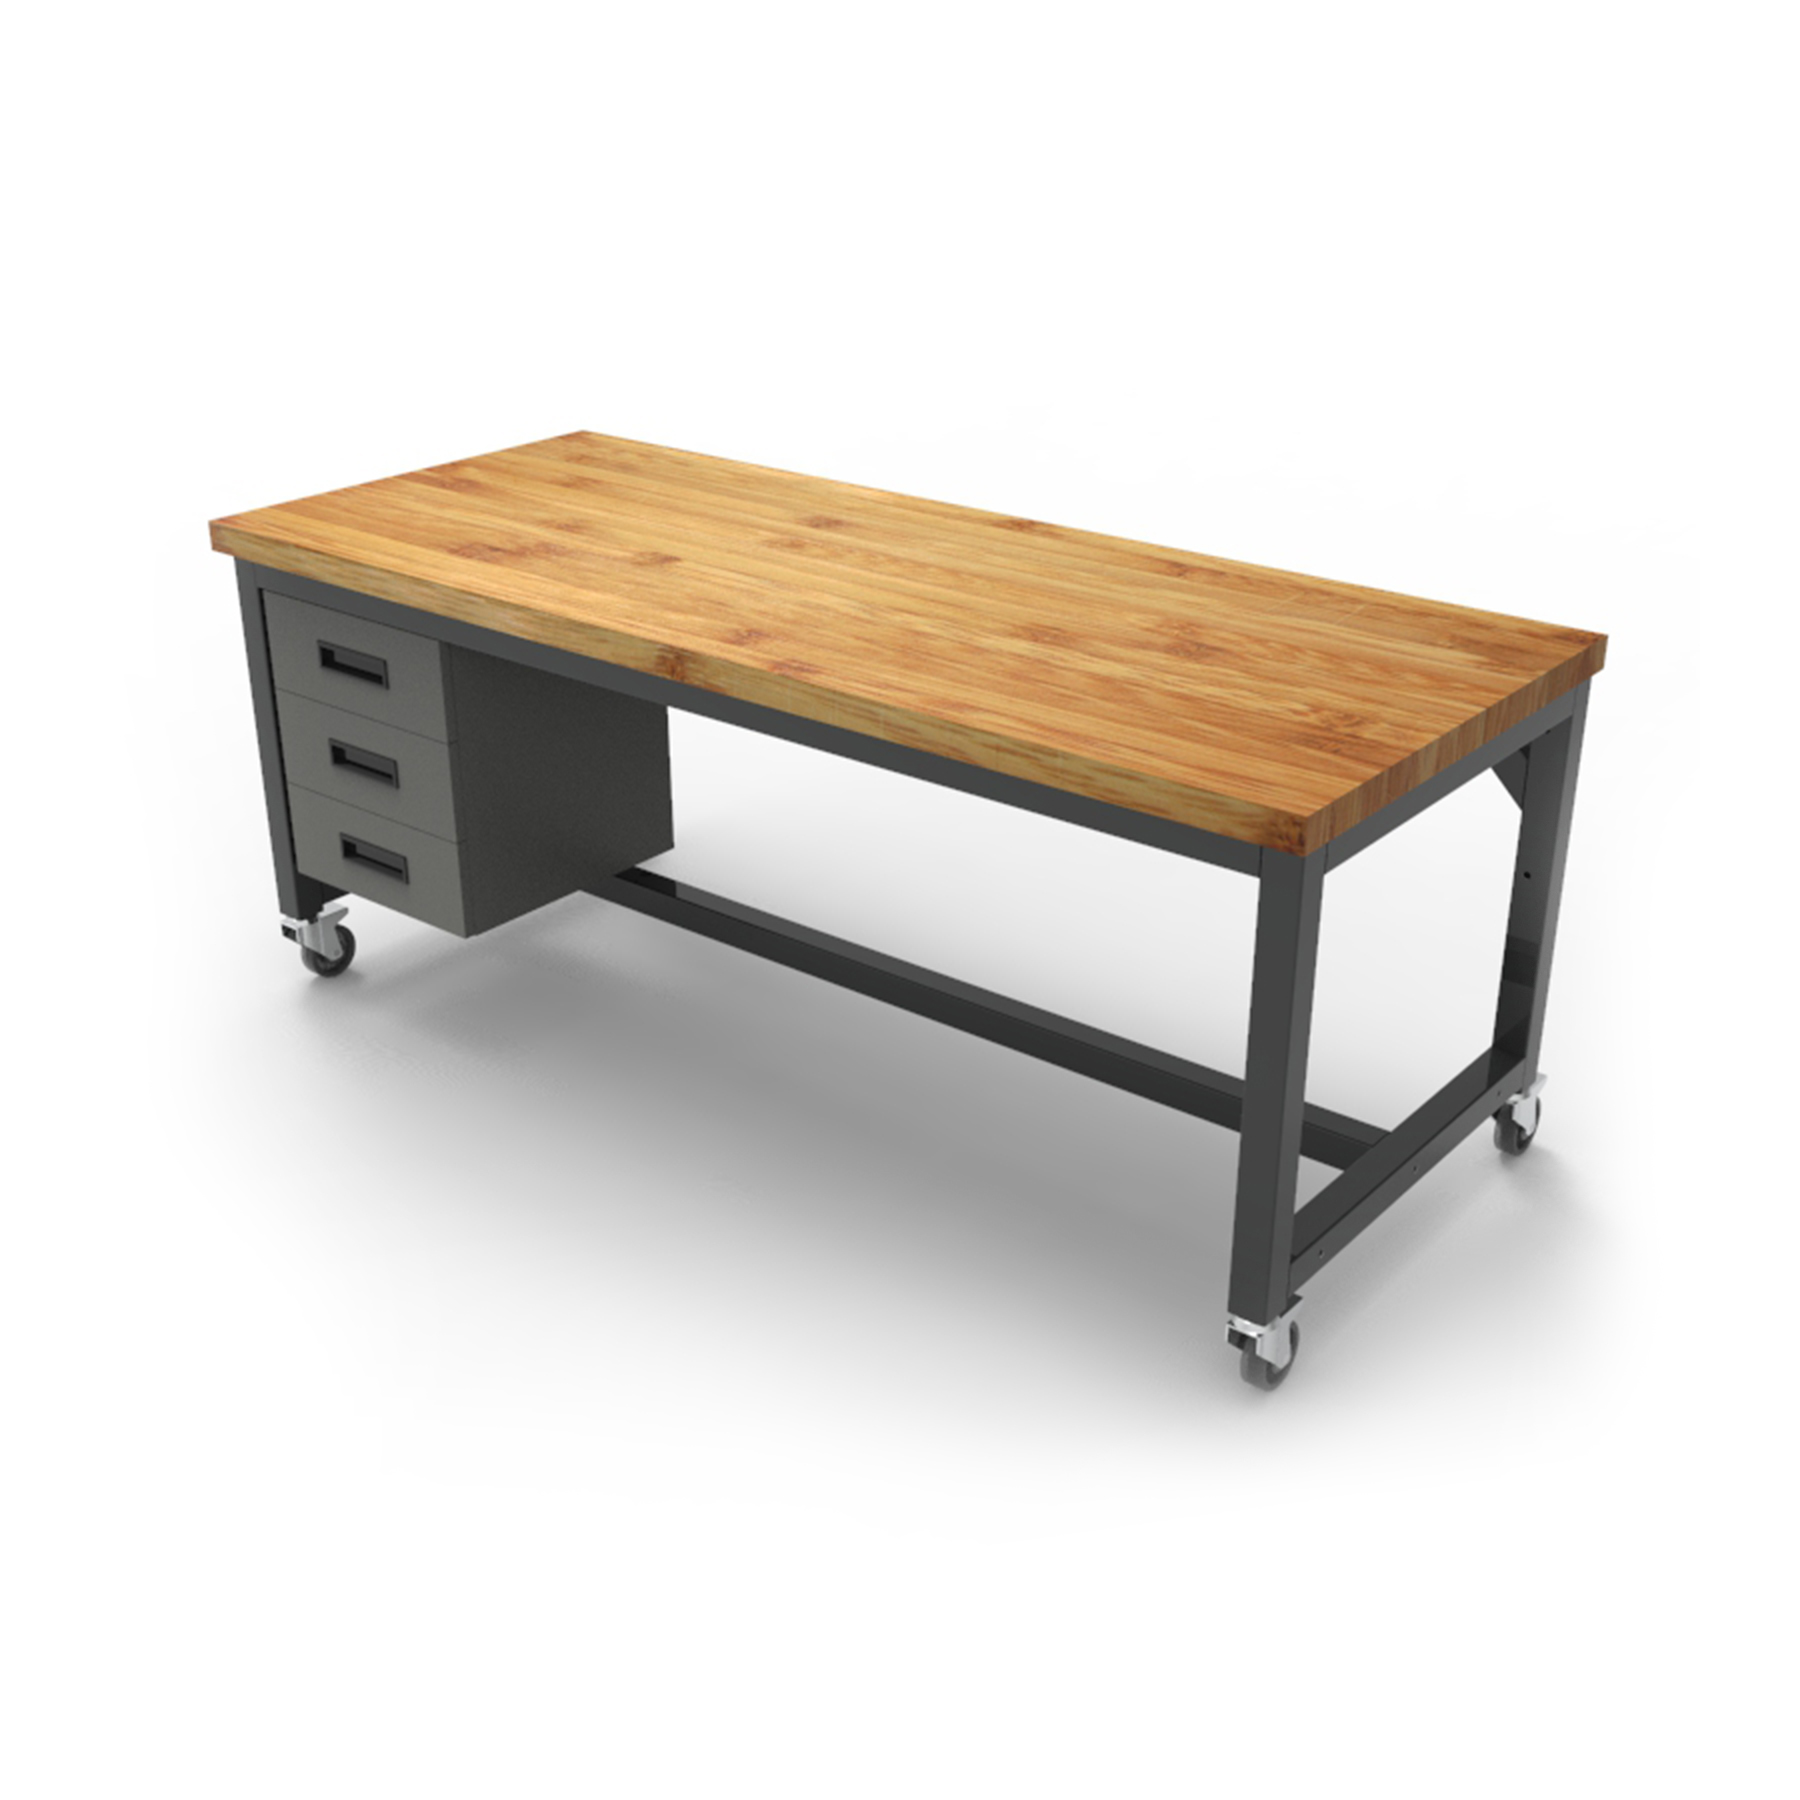 maple top desk three shelves mobile with lockable wheels